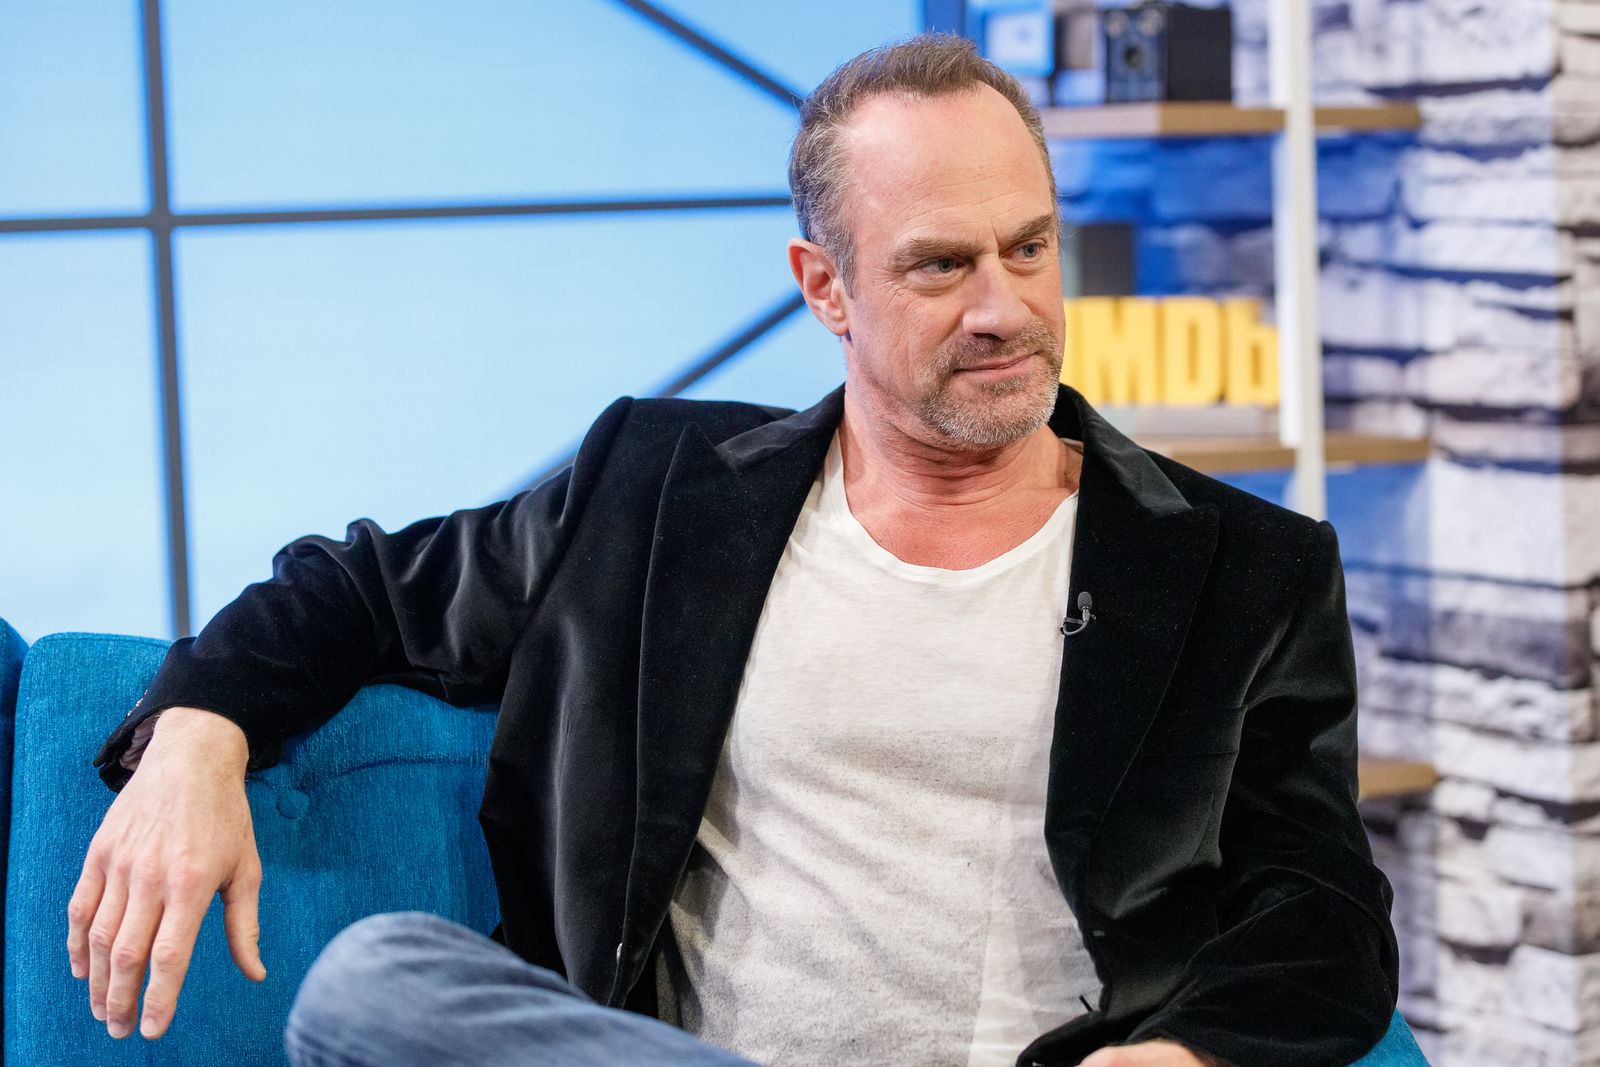 Christopher Meloni visits "The IMDb Show" on March 26, 2019, in Studio City, California | Photo: Rich Polk/Getty Images